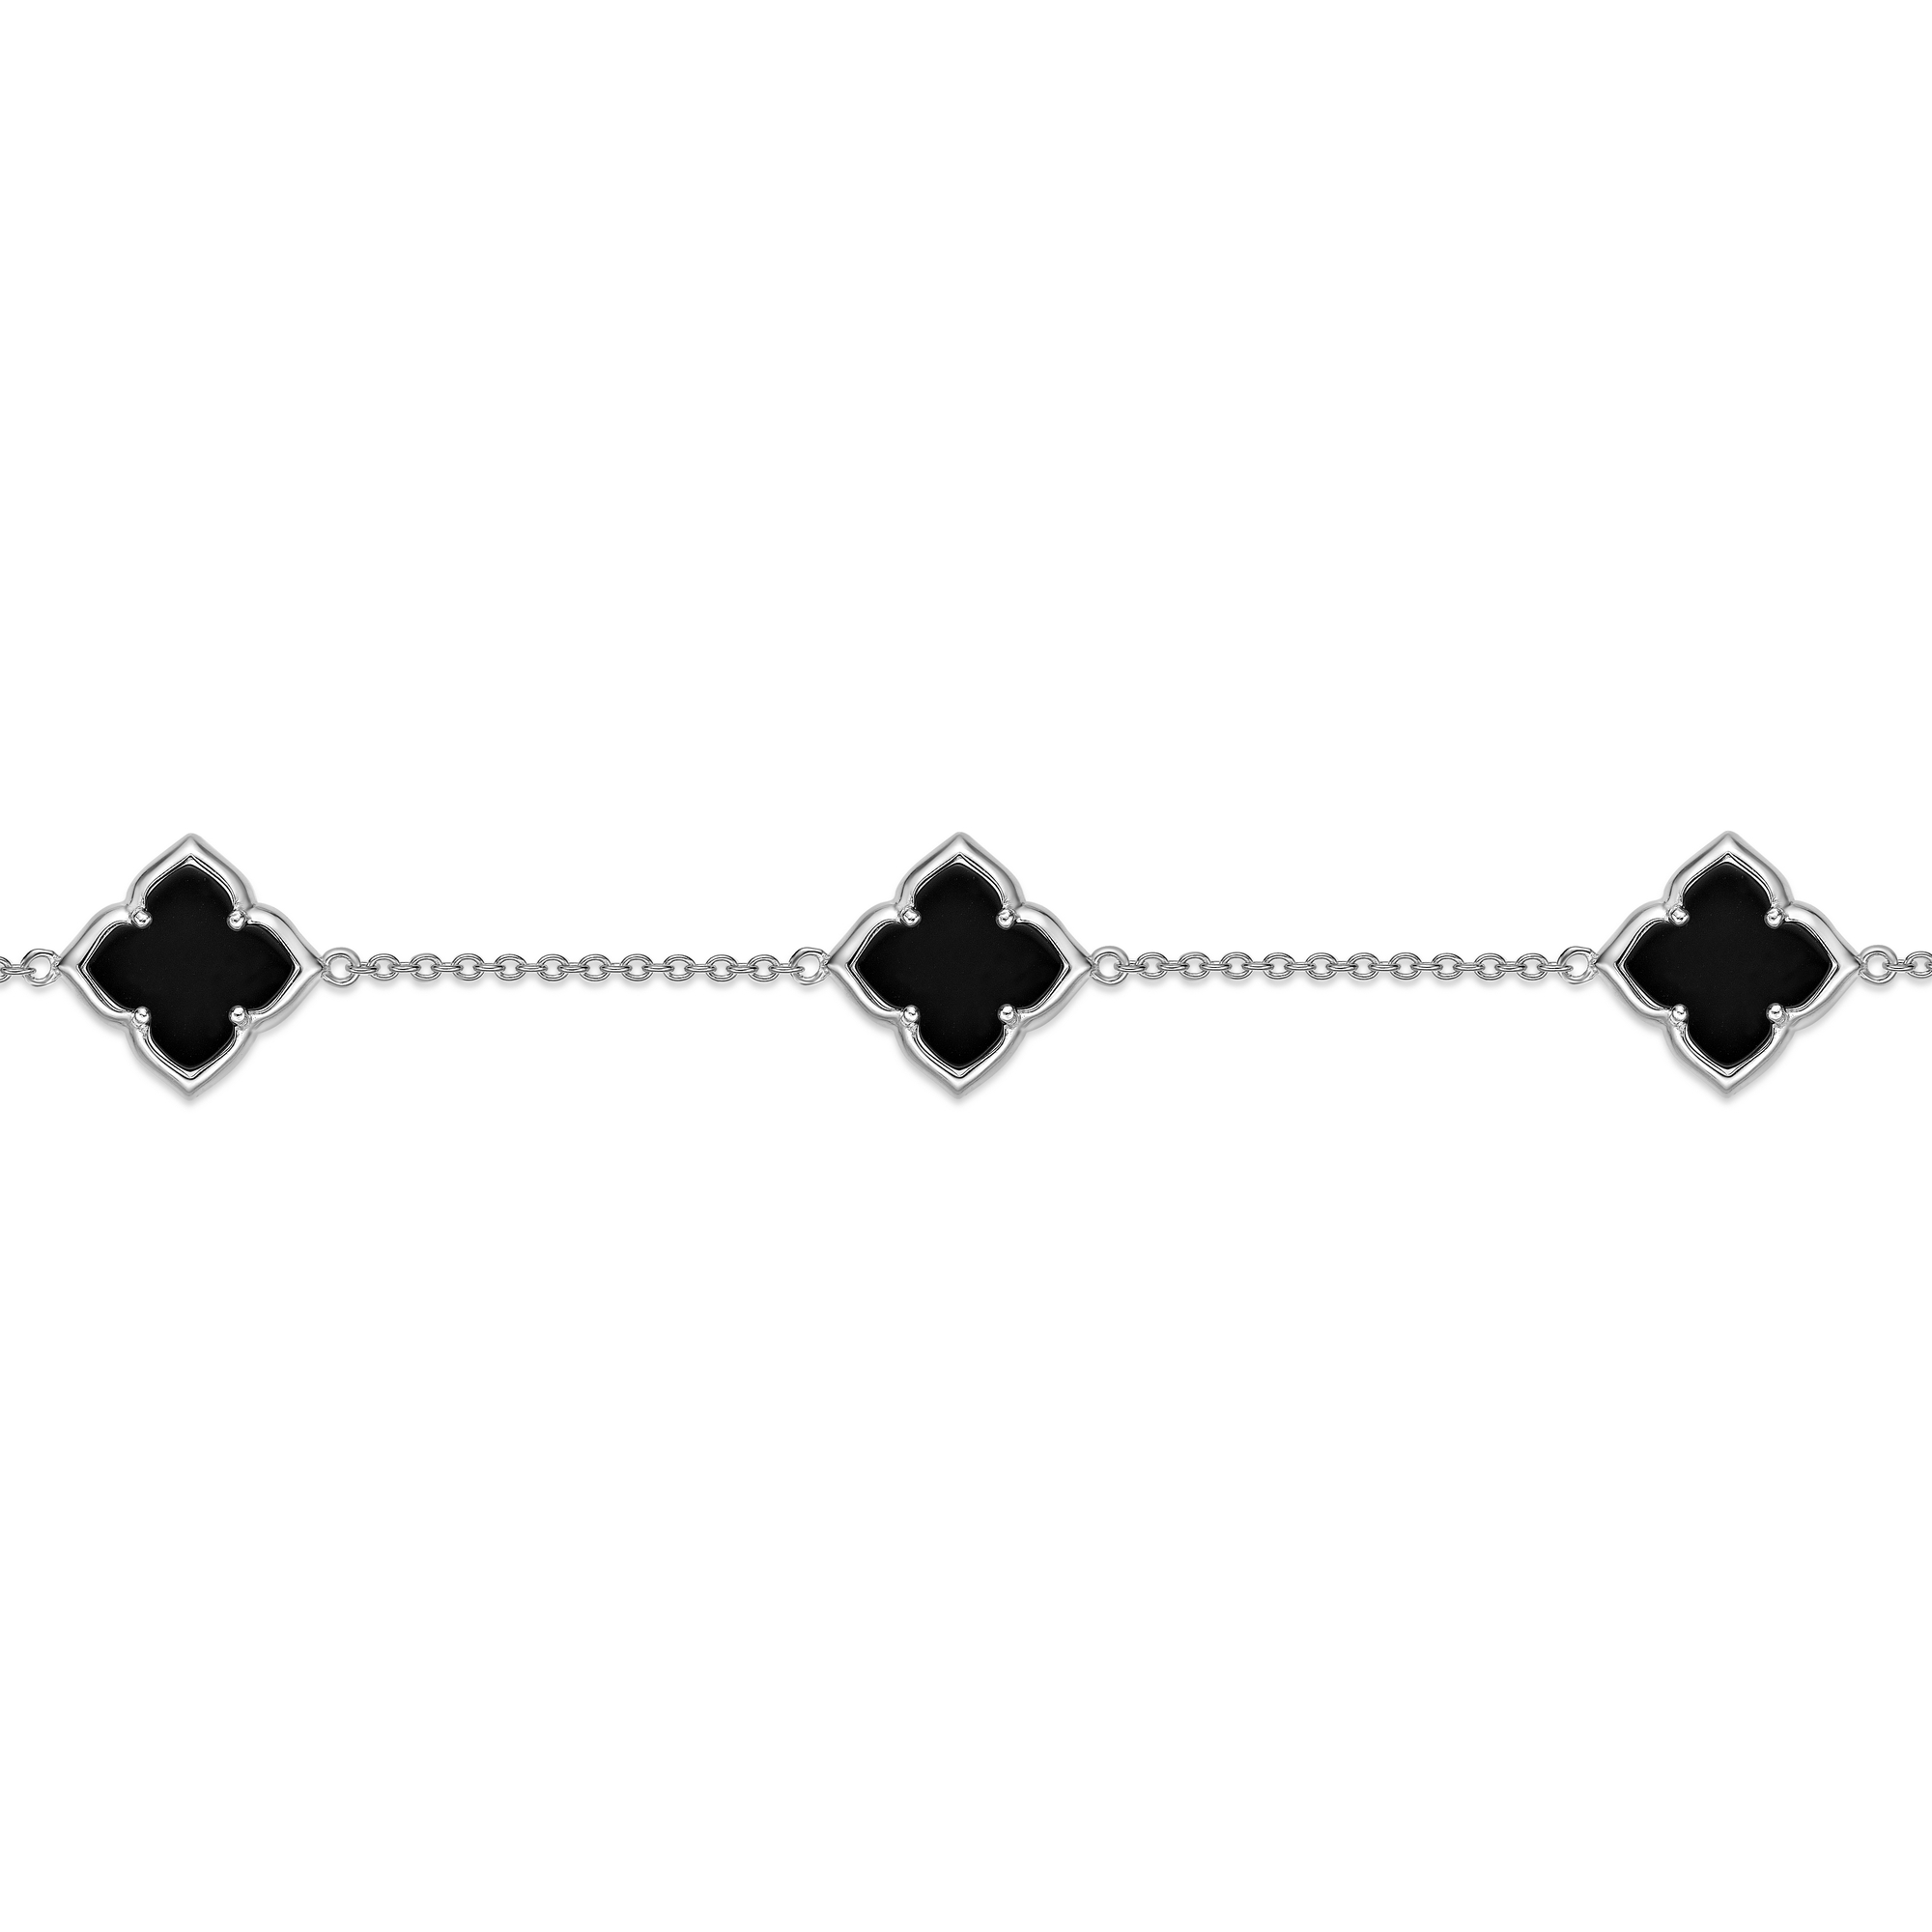 Lavari Jewelers Women’s Black Onyx 3 Clover Bracelet with Lobster Clasp, 925 Sterling Silver, 7-8 Inches - Black Onyx